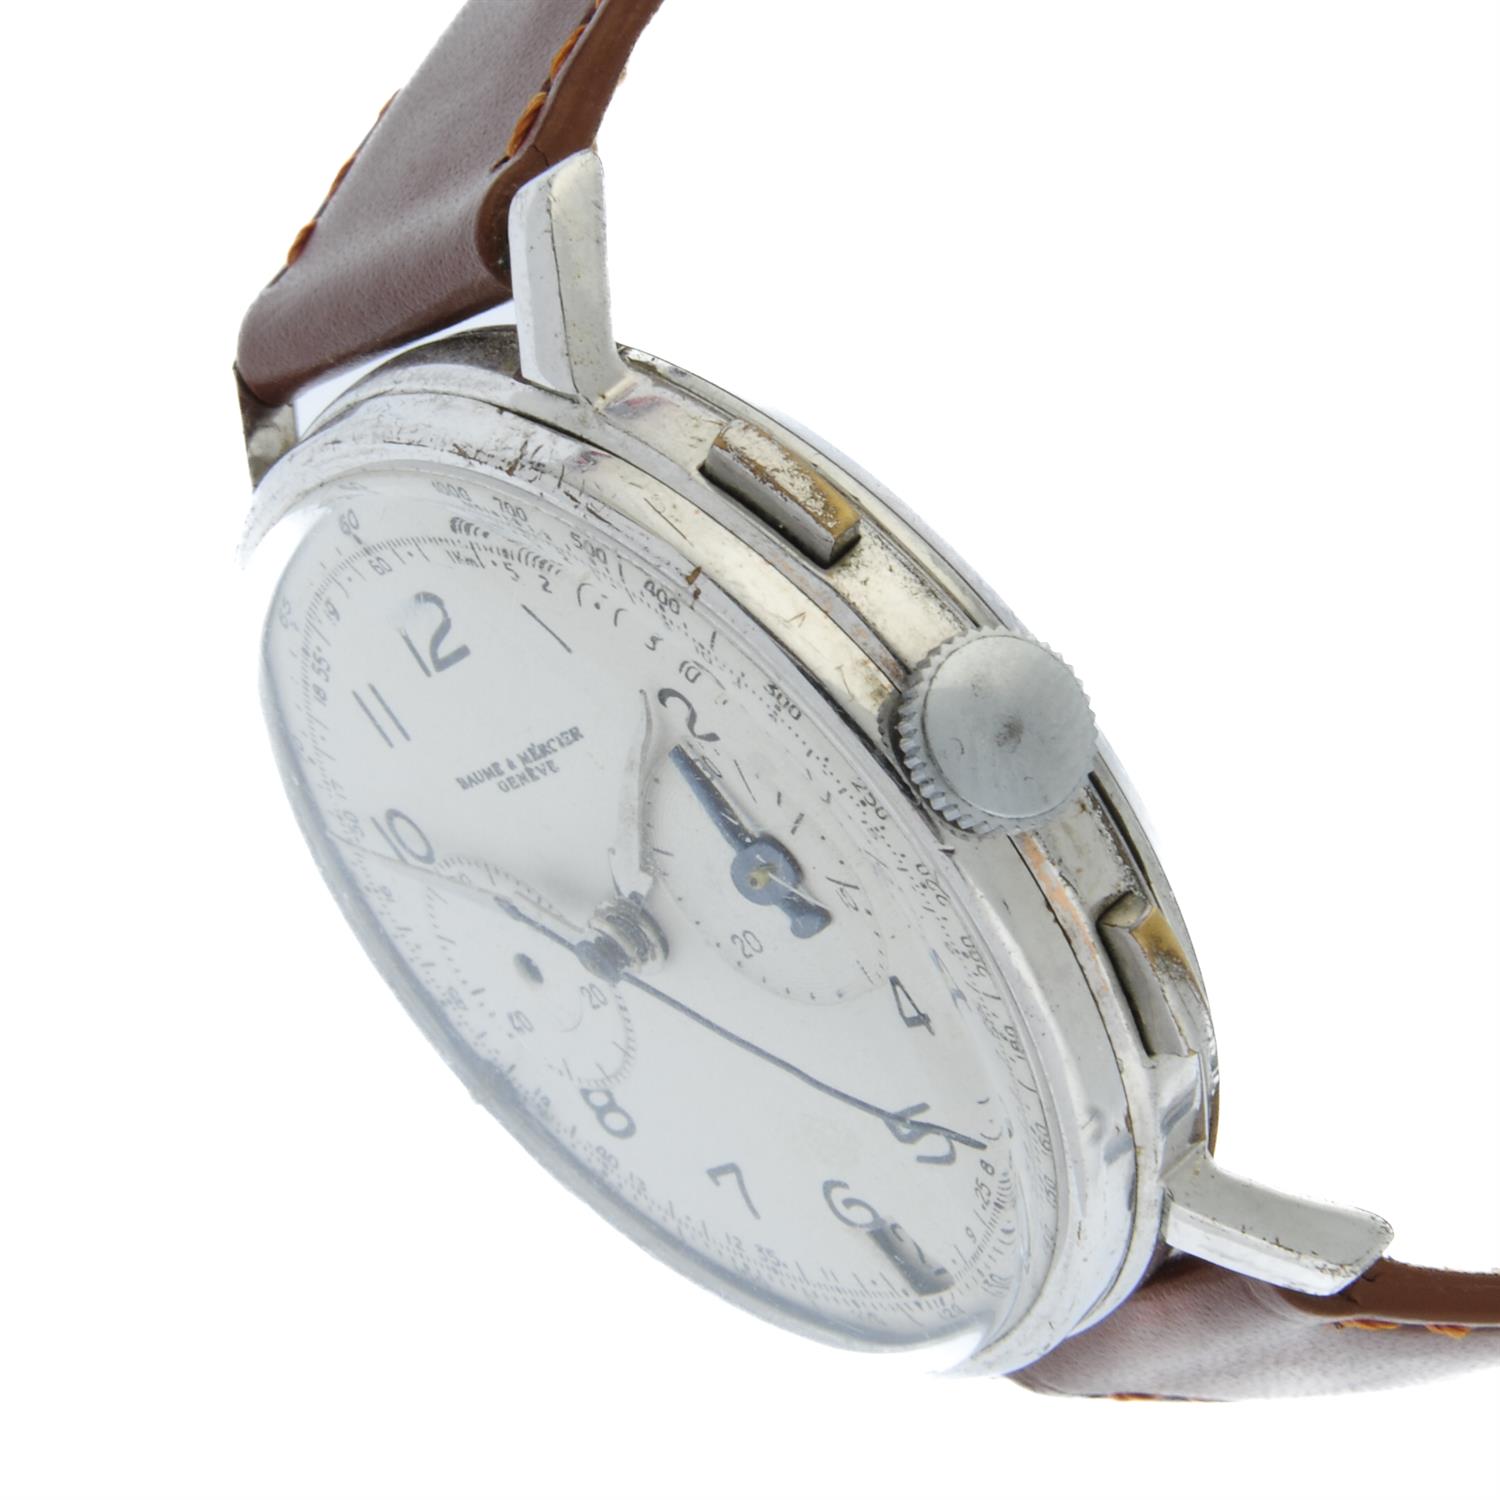 Baume & Mercier - a chronograph watch, 37mm. - Image 3 of 4